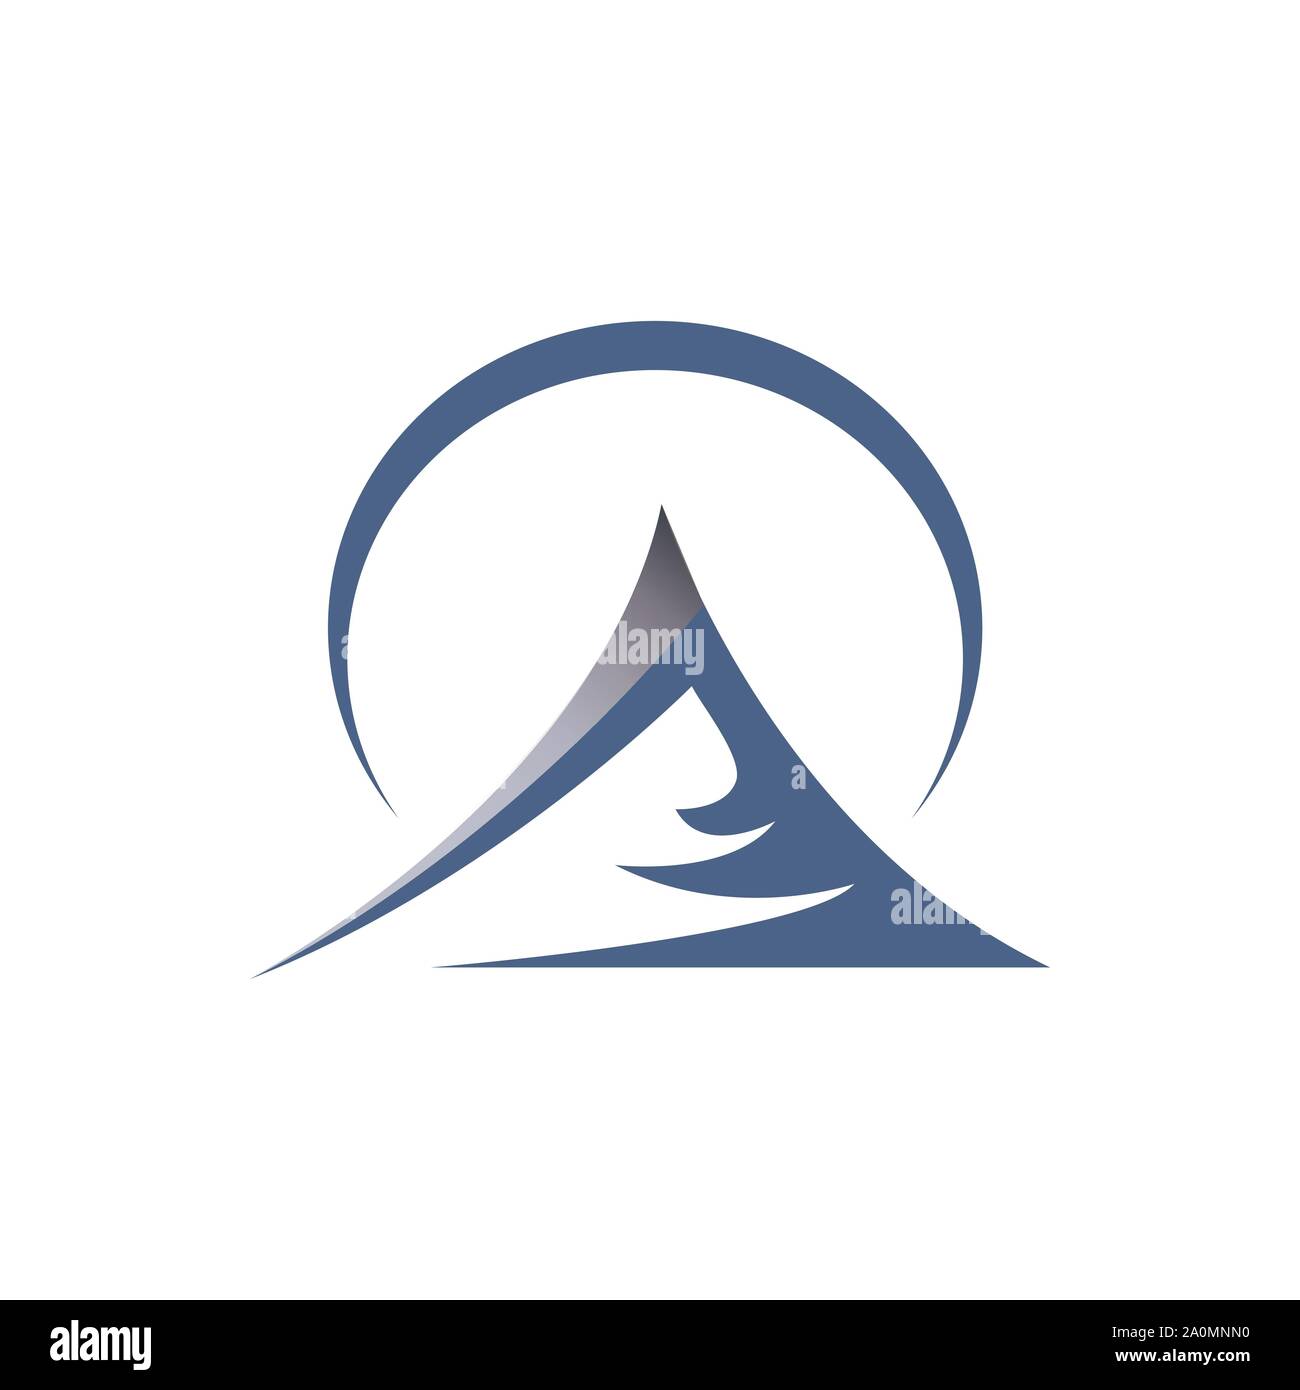 circle curve with Simple Mountain logo design vector illustration Stock Vector